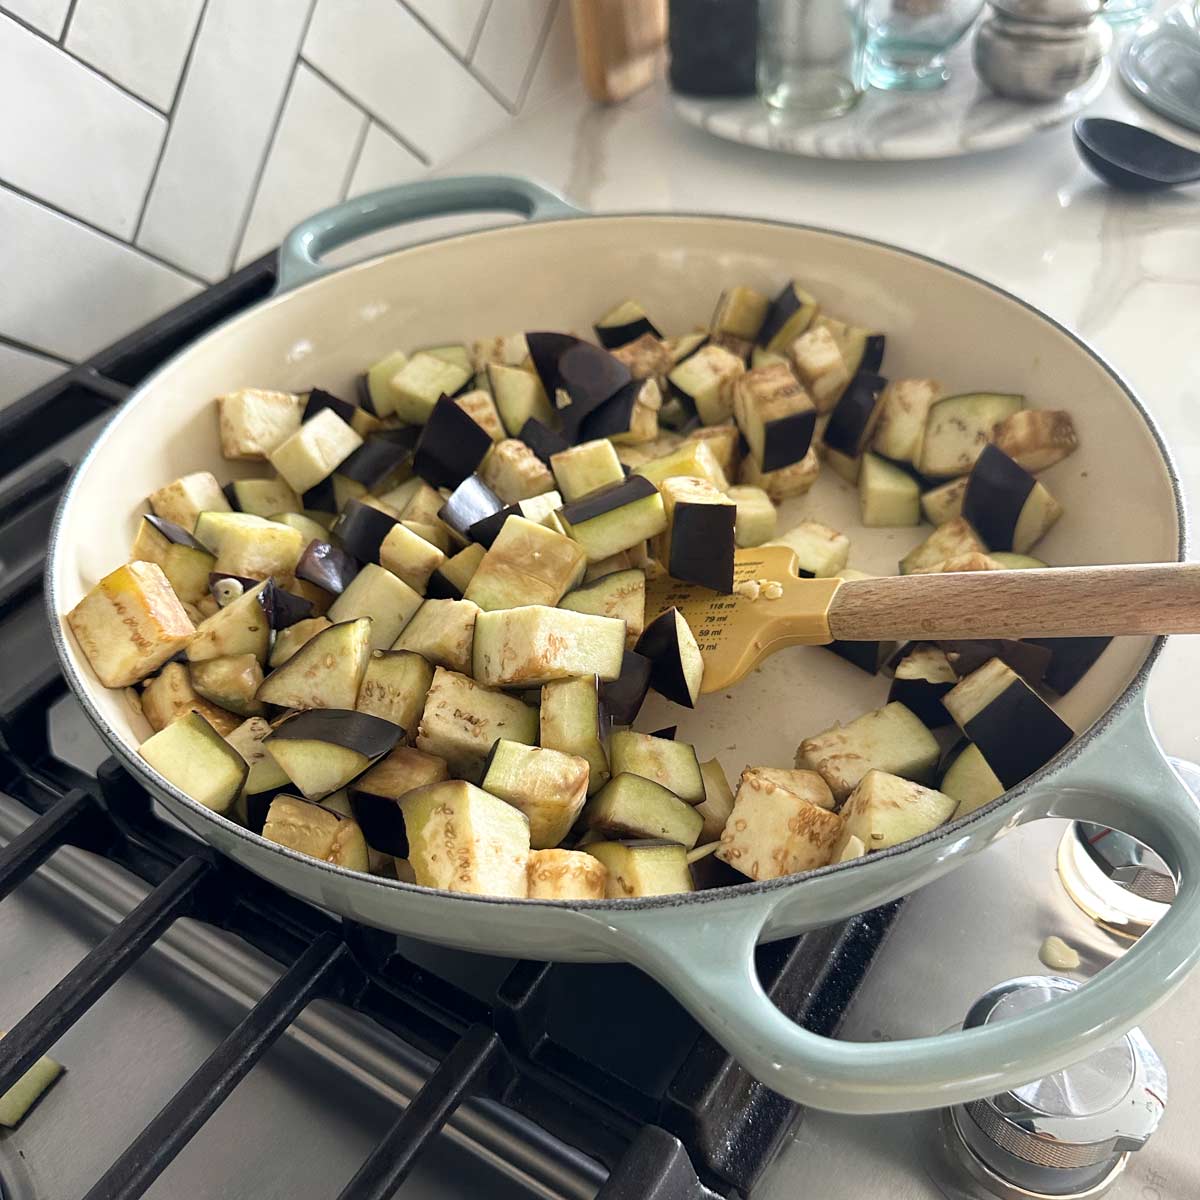 Sauteing eggplant with garlic in oil in a large skillet.